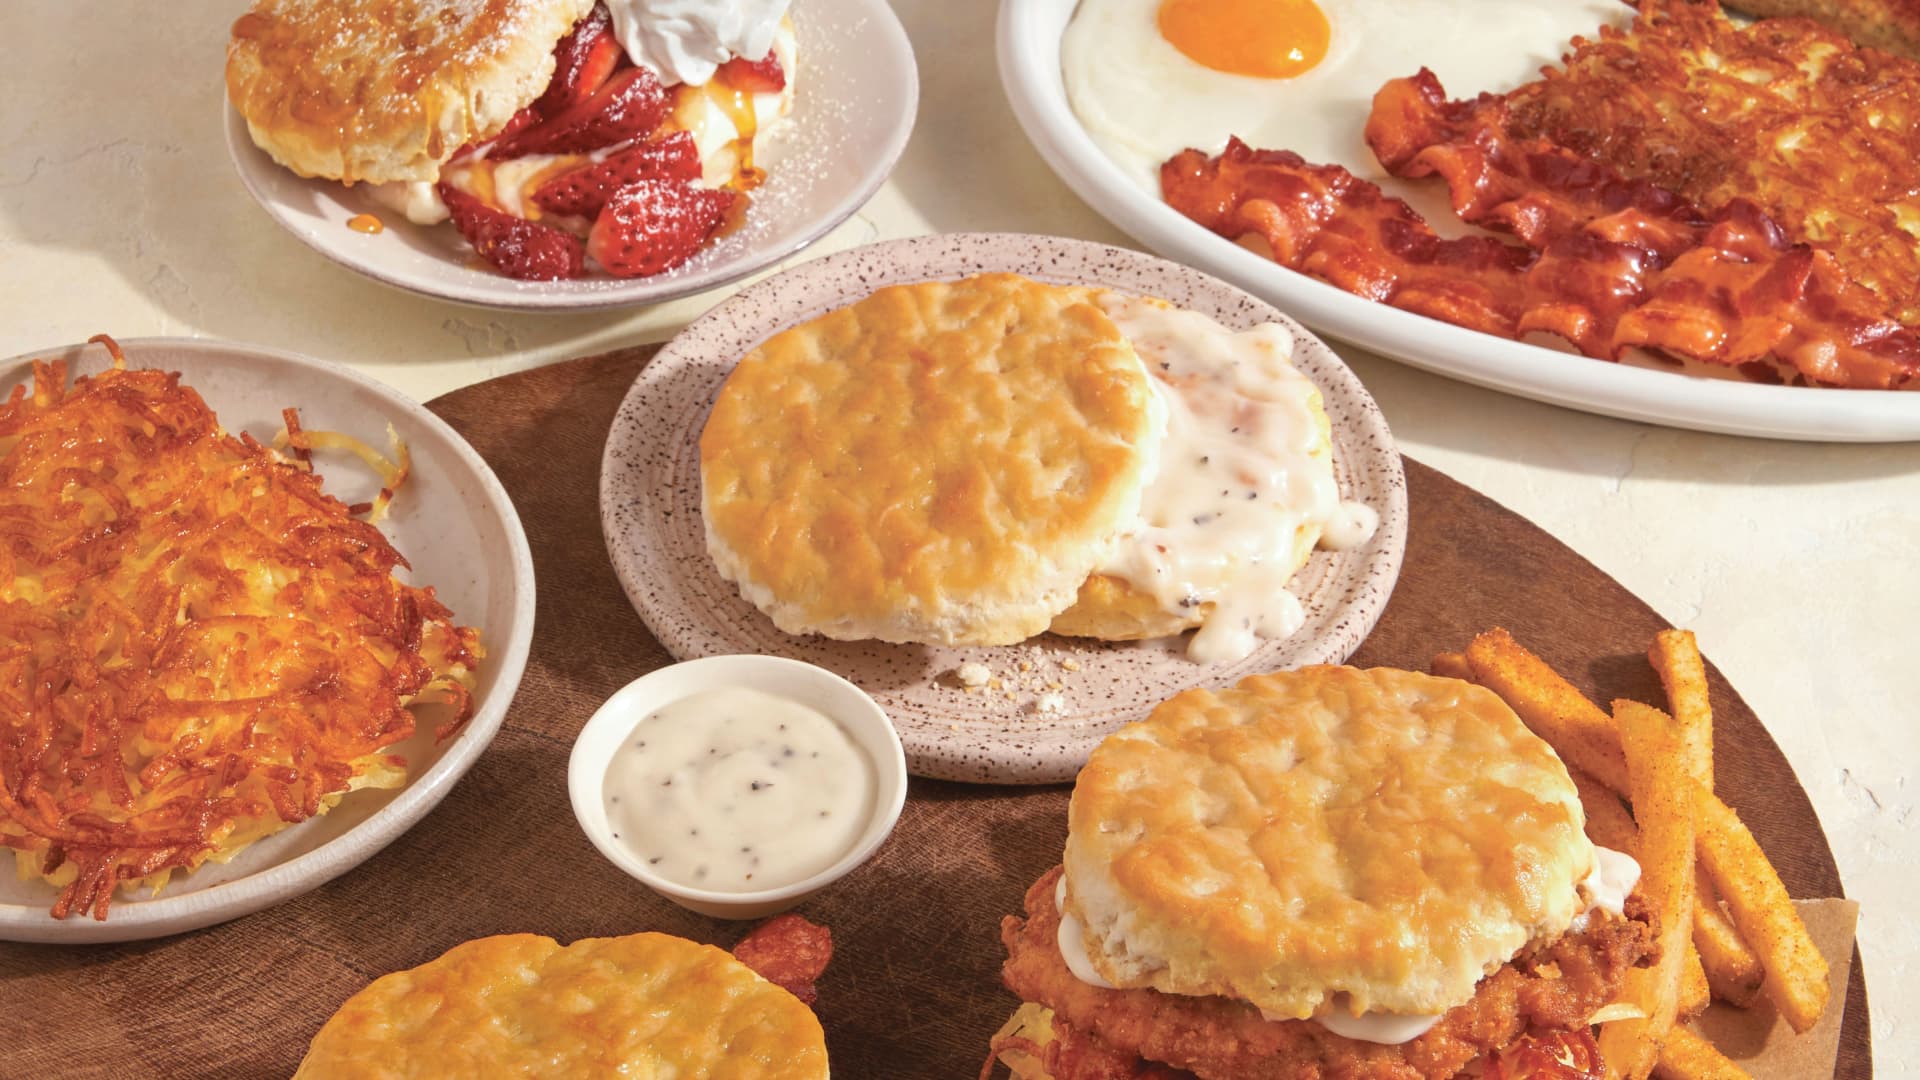 IHOP rolls out biscuits menu nationwide for the first time as the chain fights slowing sales